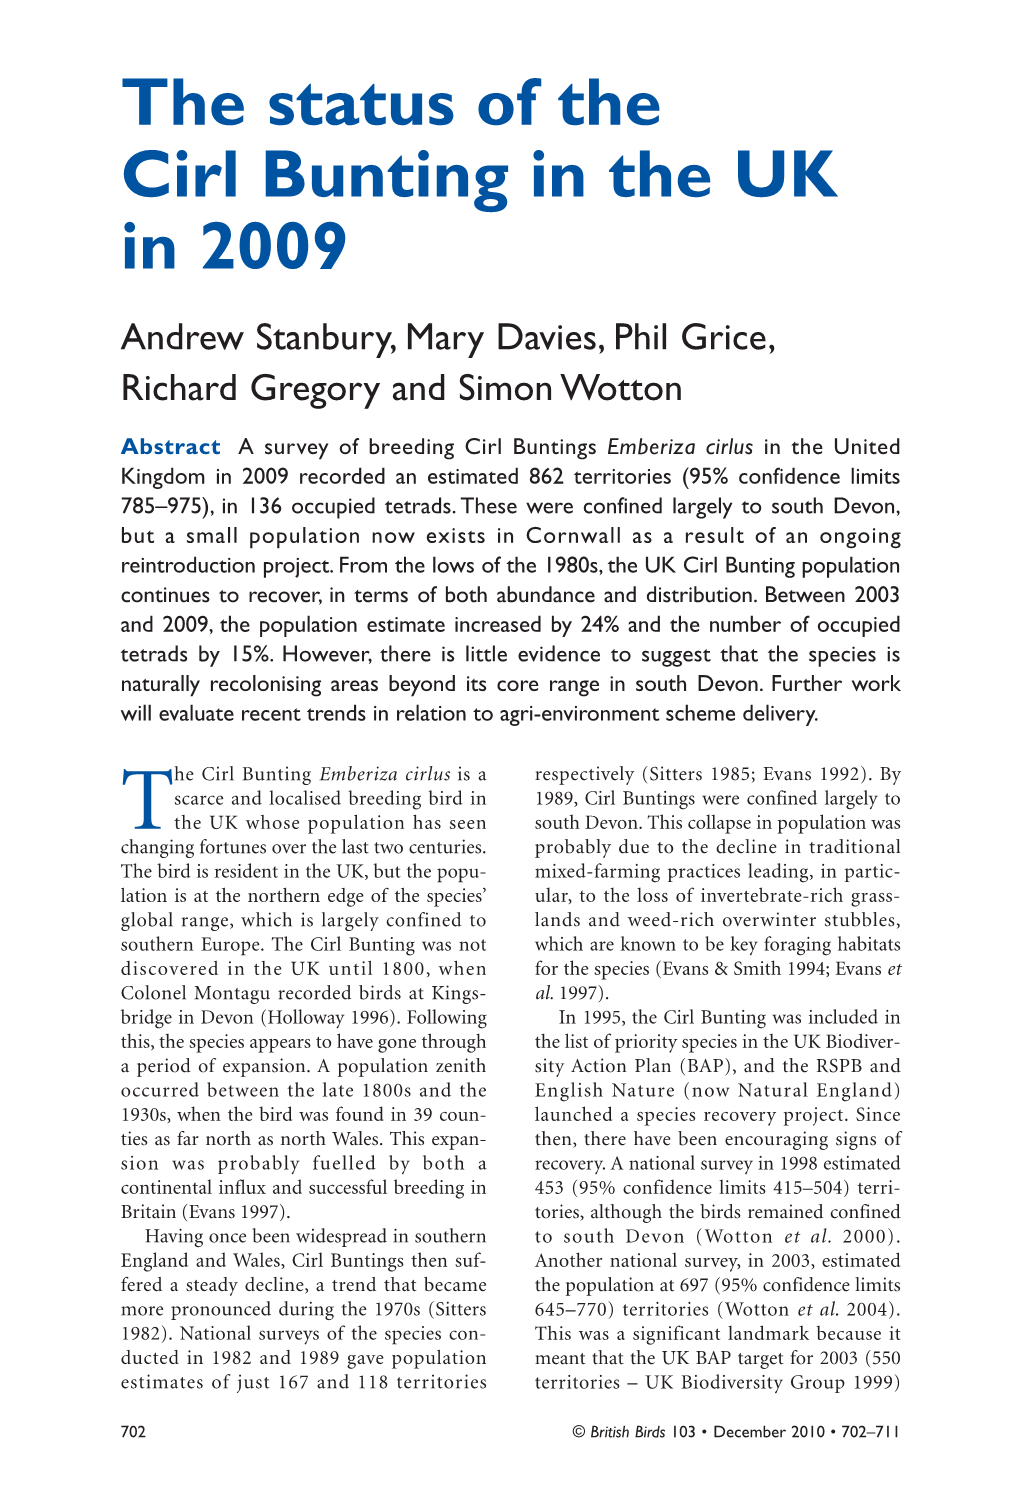 The Status of the Cirl Bunting in the UK in 2009 Andrew Stanbury, Mary Davies, Phil Grice, Richard Gregory and Simon Wotton